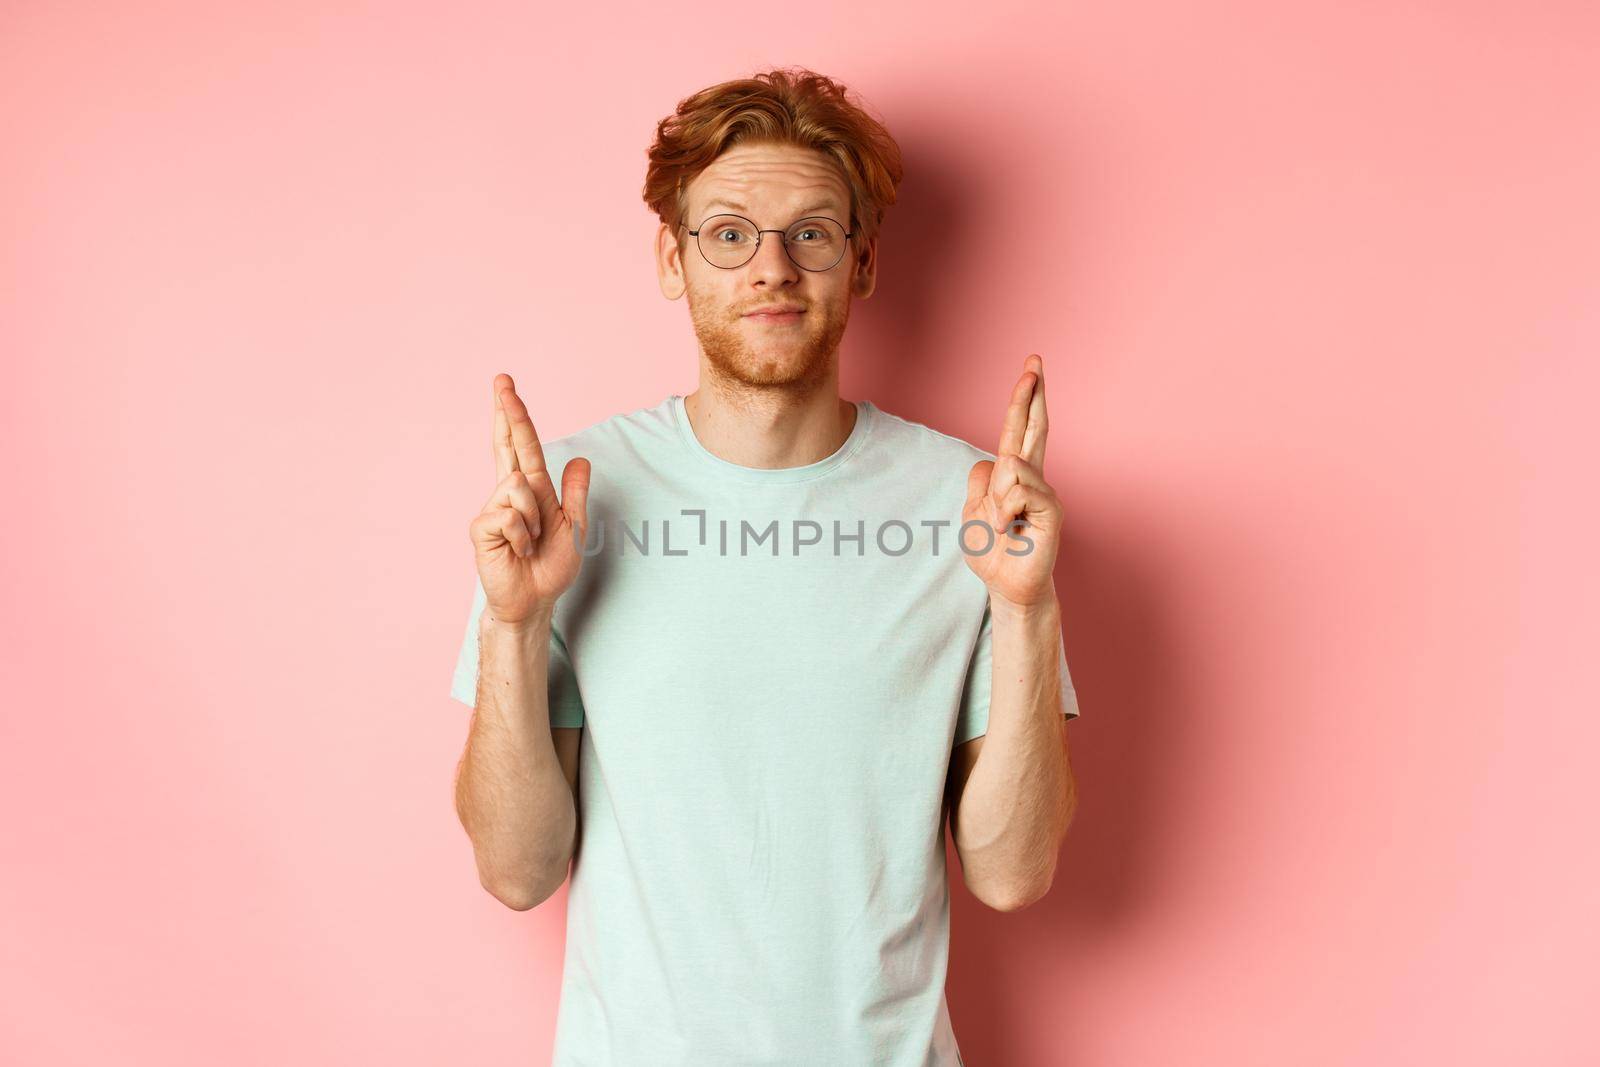 Attractive guy having faith in dreams, smiling hopeful and making wish with fingers crossed, feeling lucky, standing over pink background.